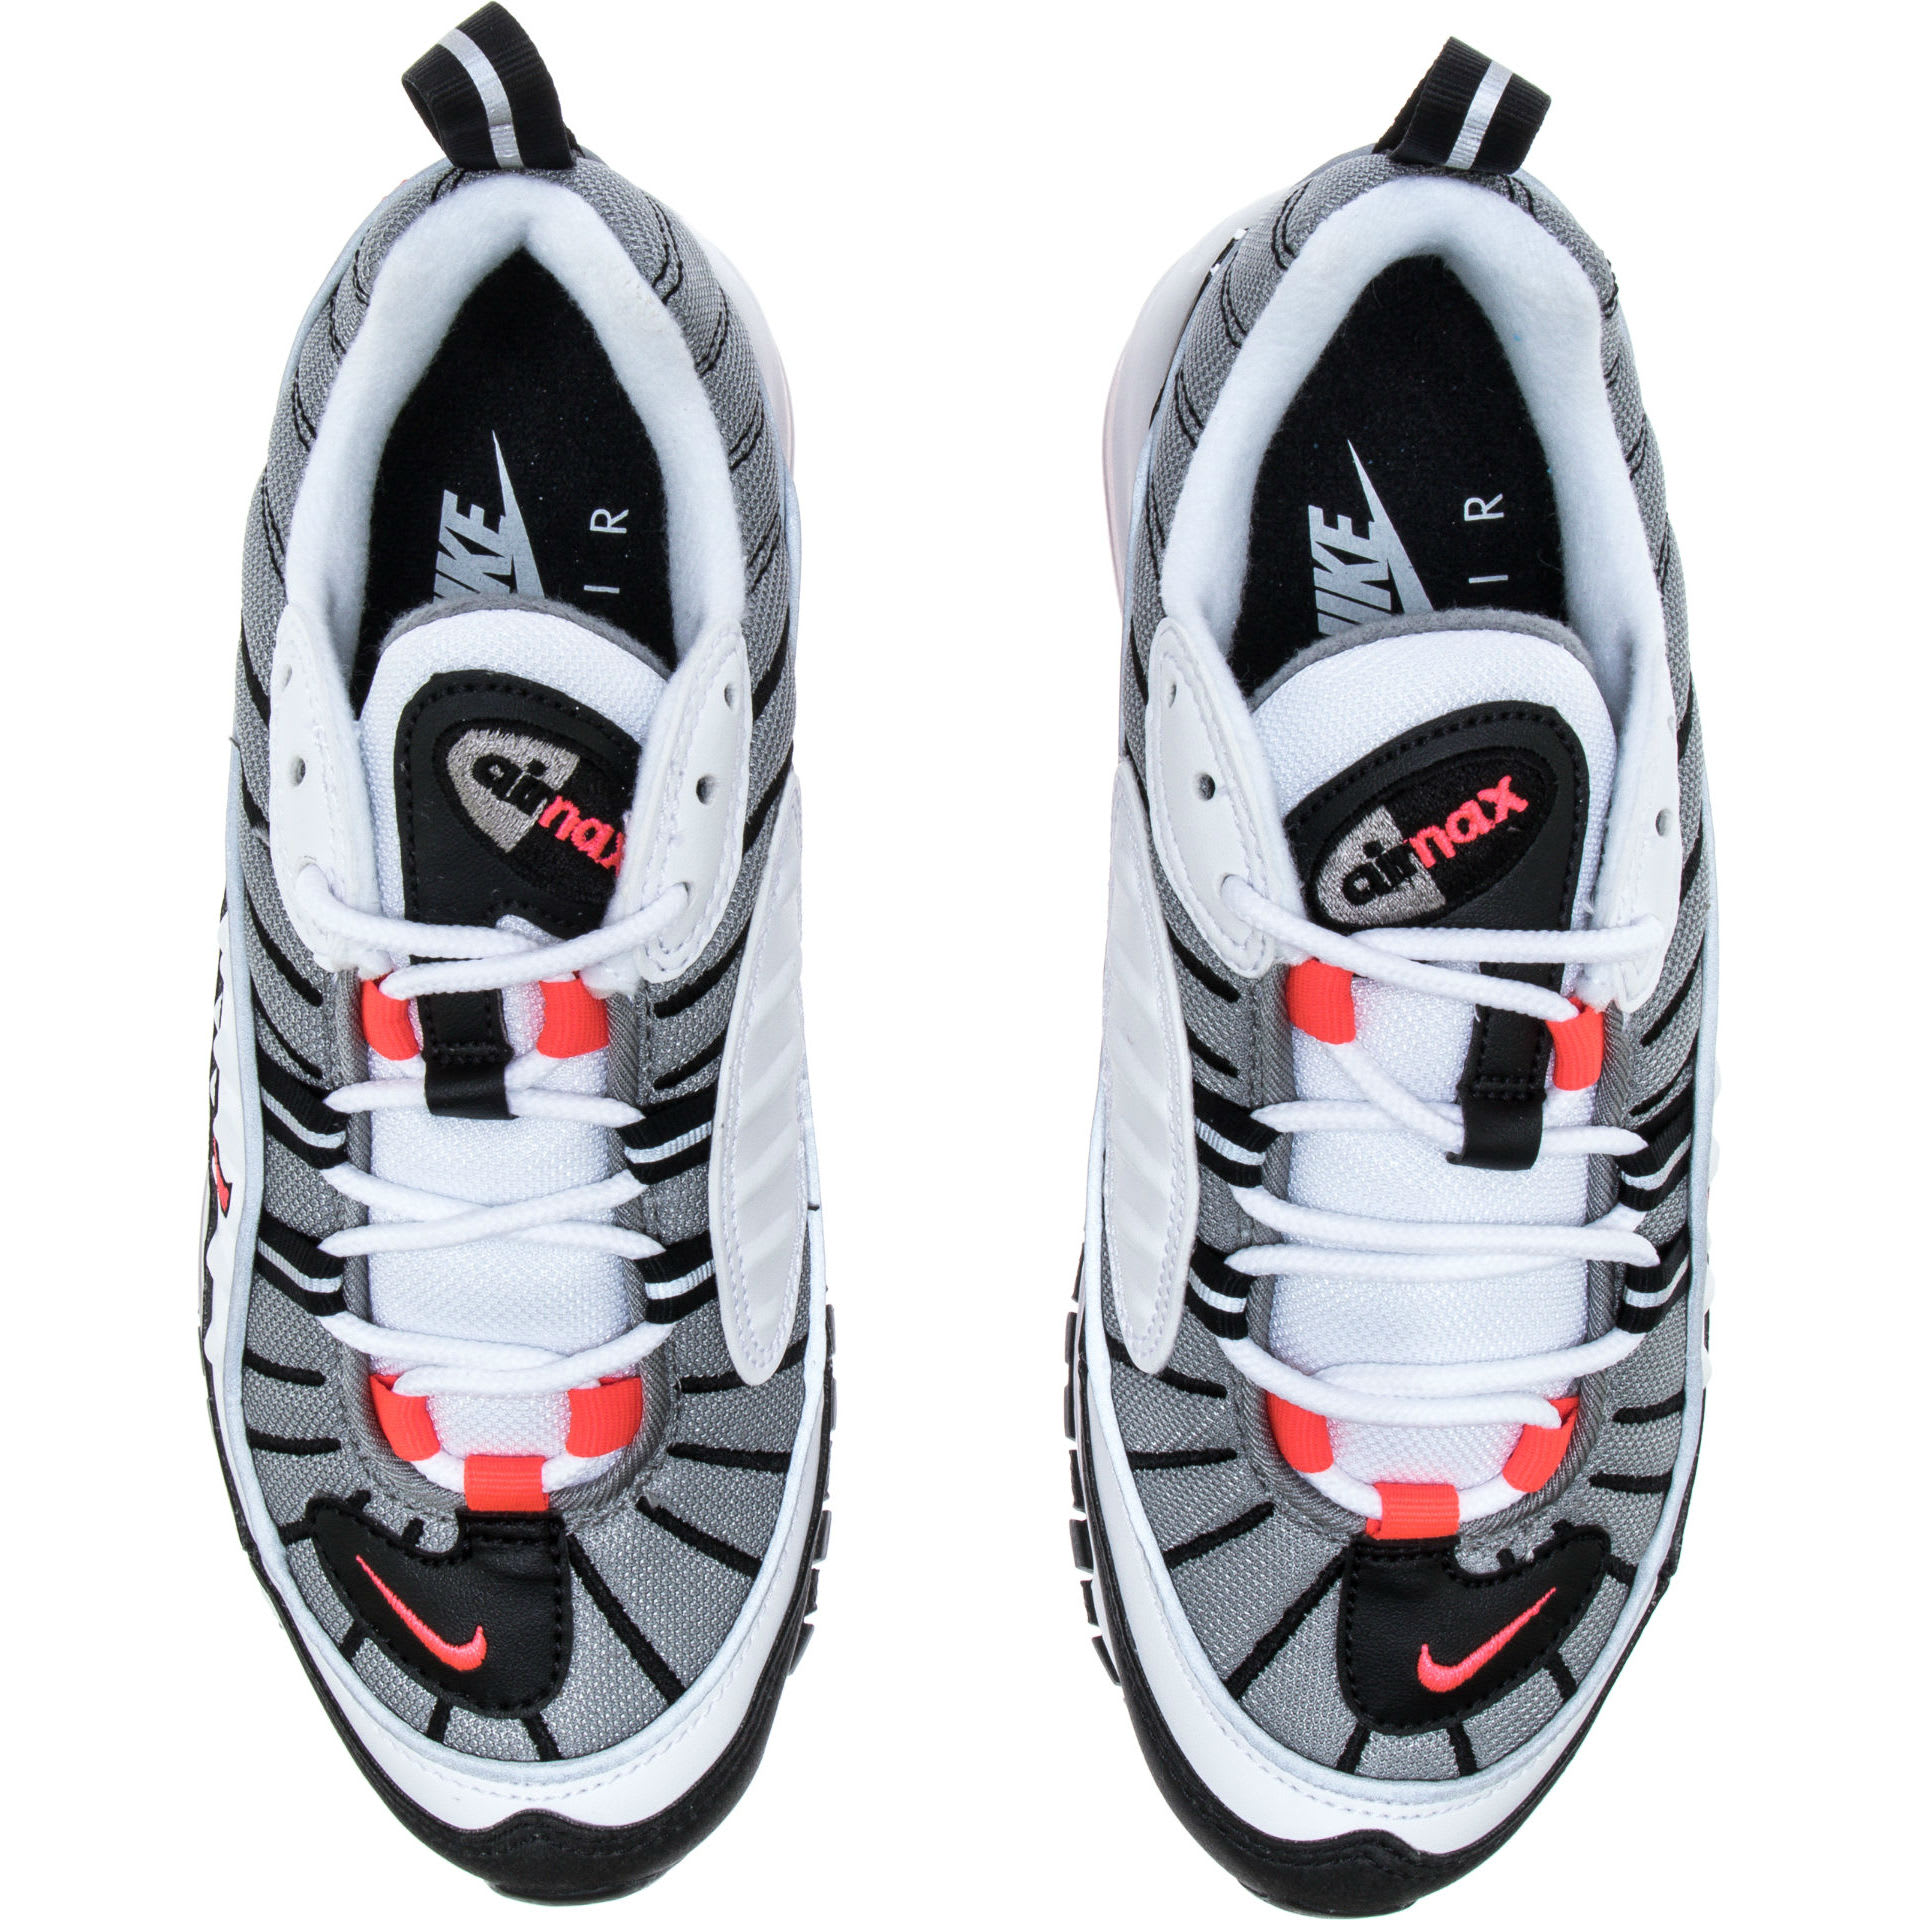 Nike WMNS Air Max 98 Solar Red Release Date AH6799-104 Top